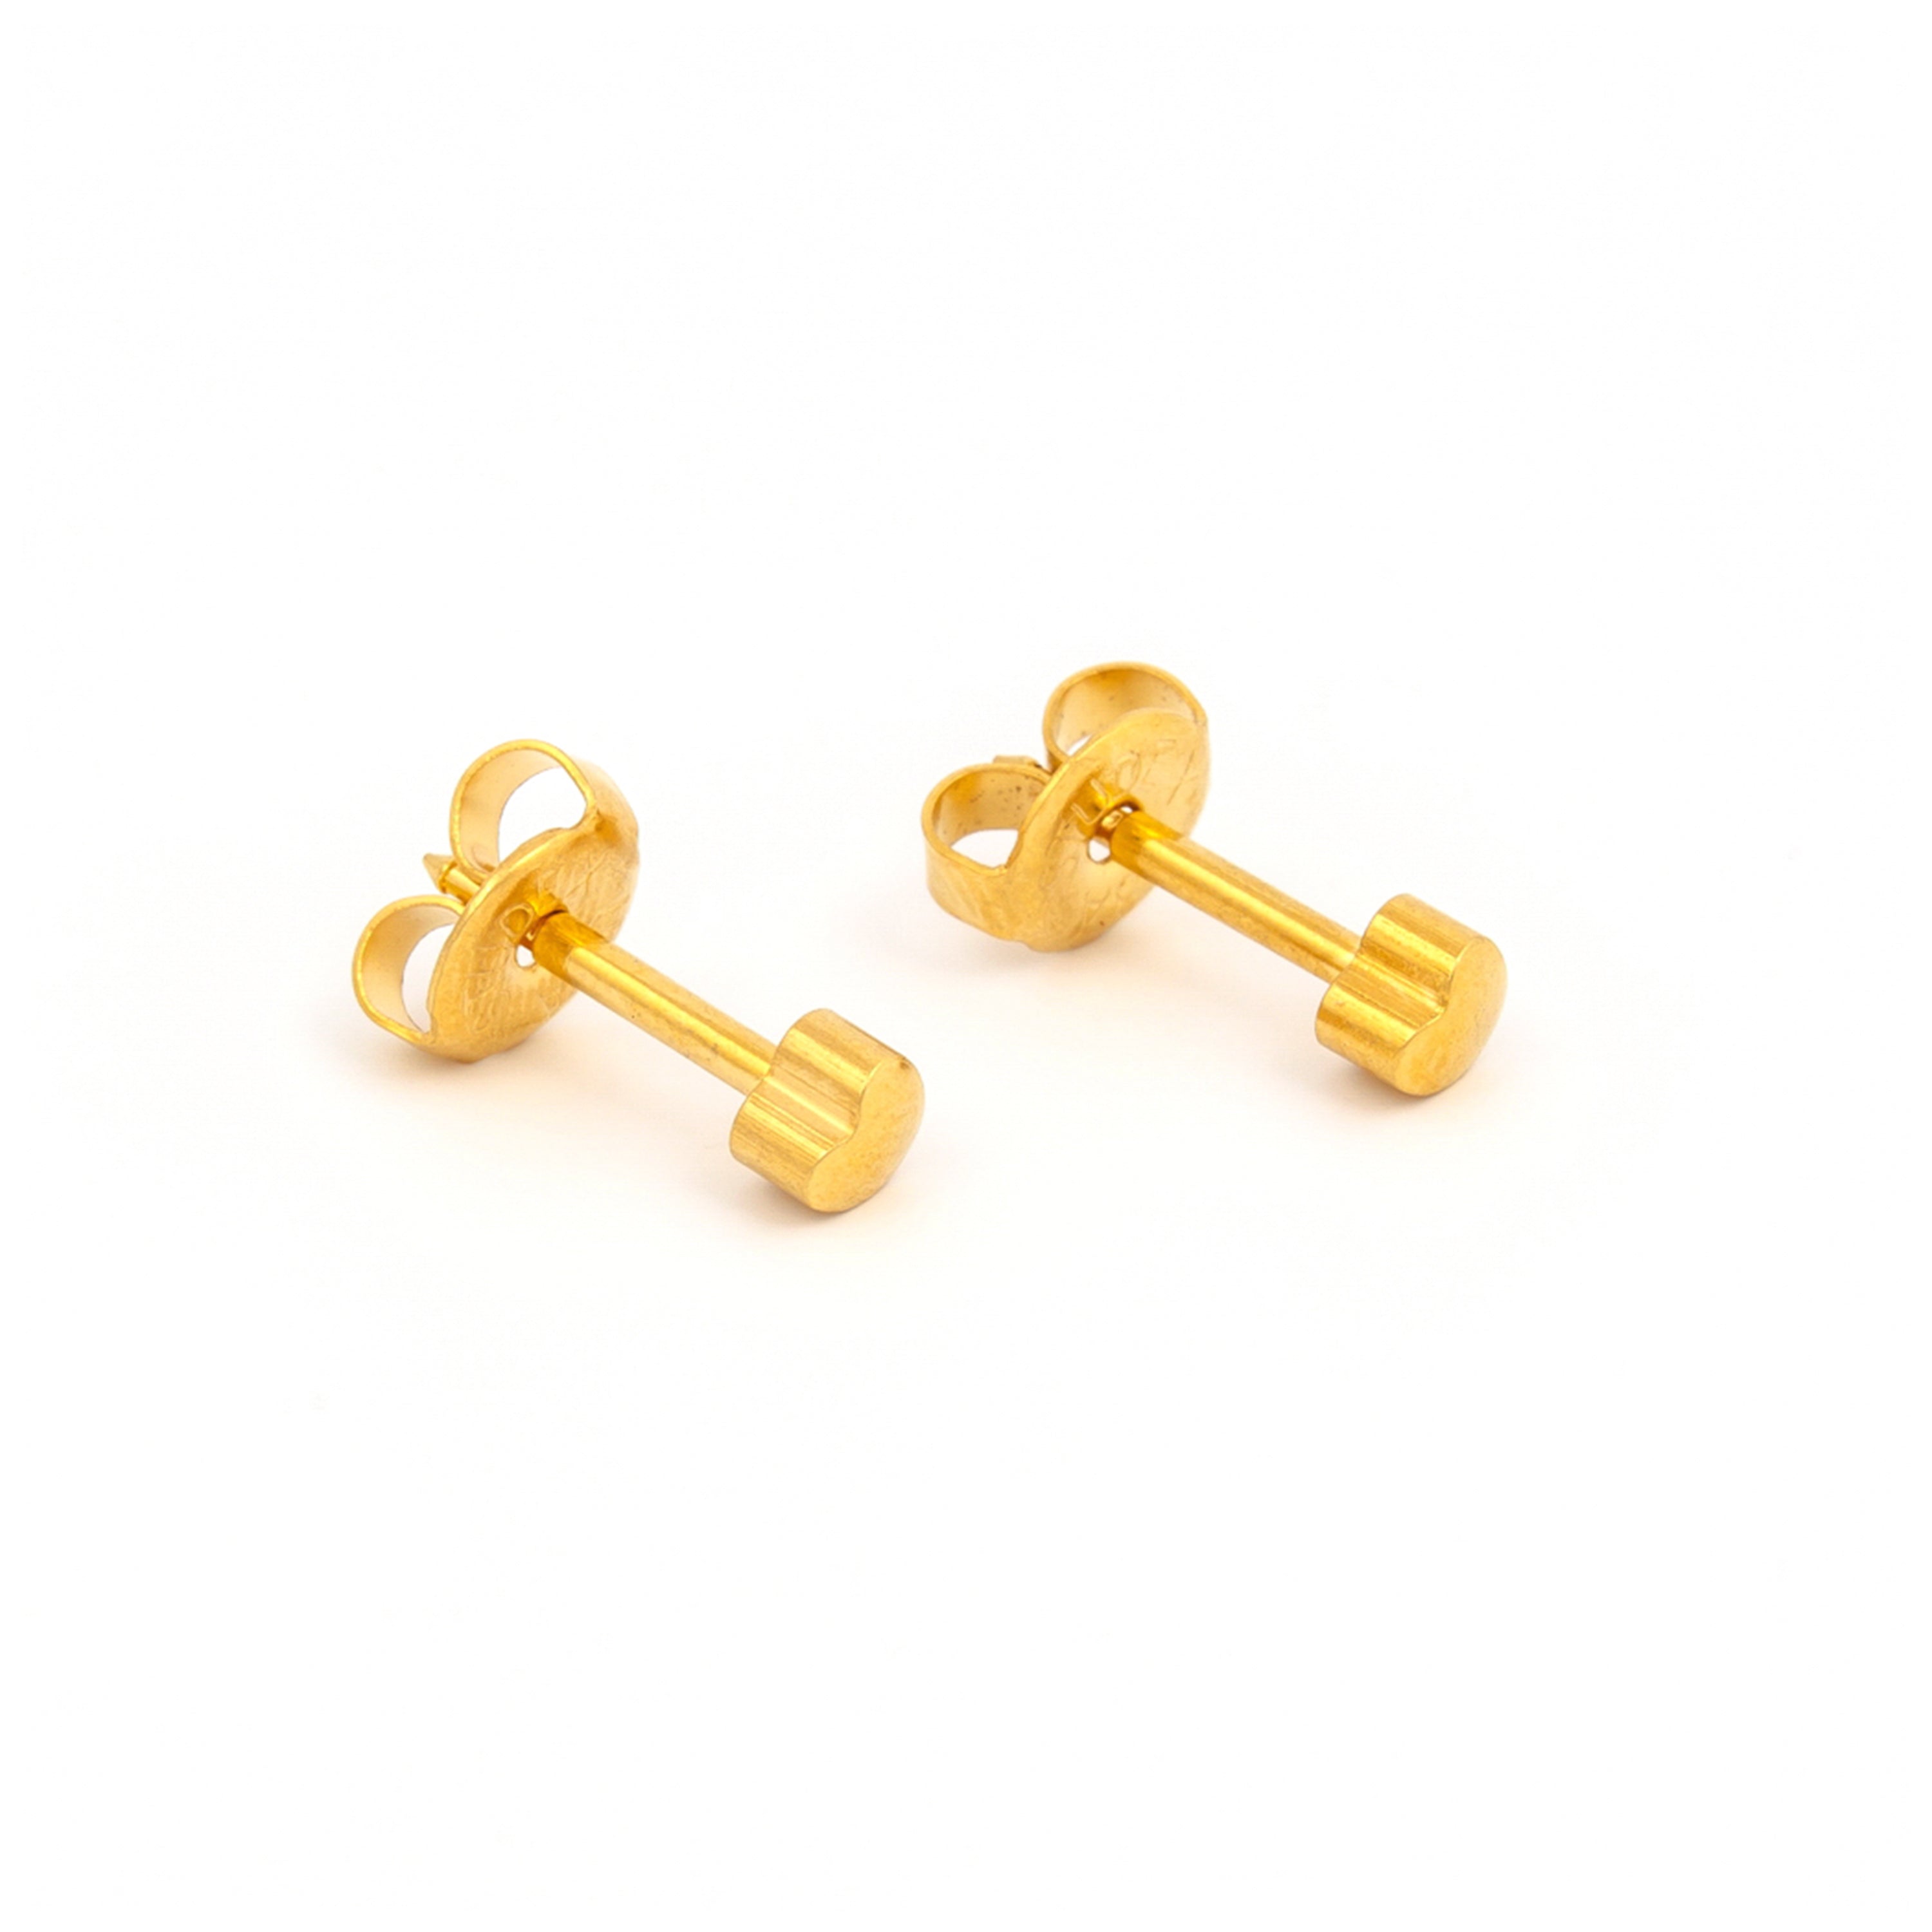 3MM Heart 24K Pure Gold Plated Ear Studs | MADE IN USA | Ideal for everyday wear